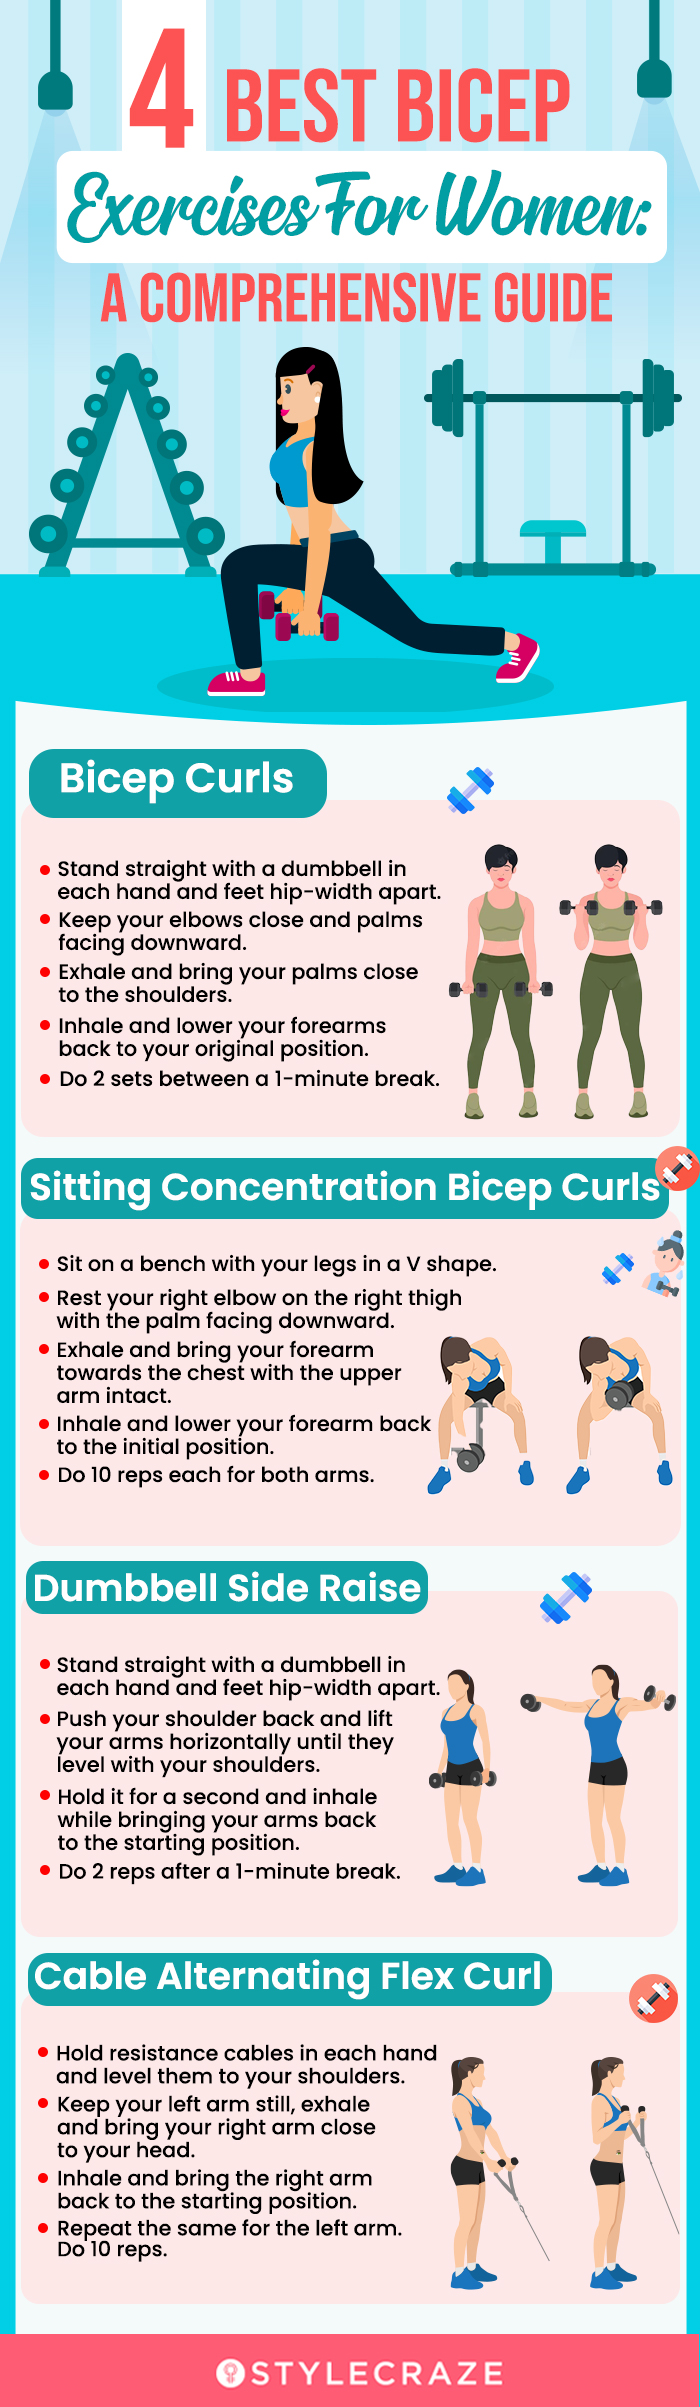 4 best bicep excercises for women  [infographic]